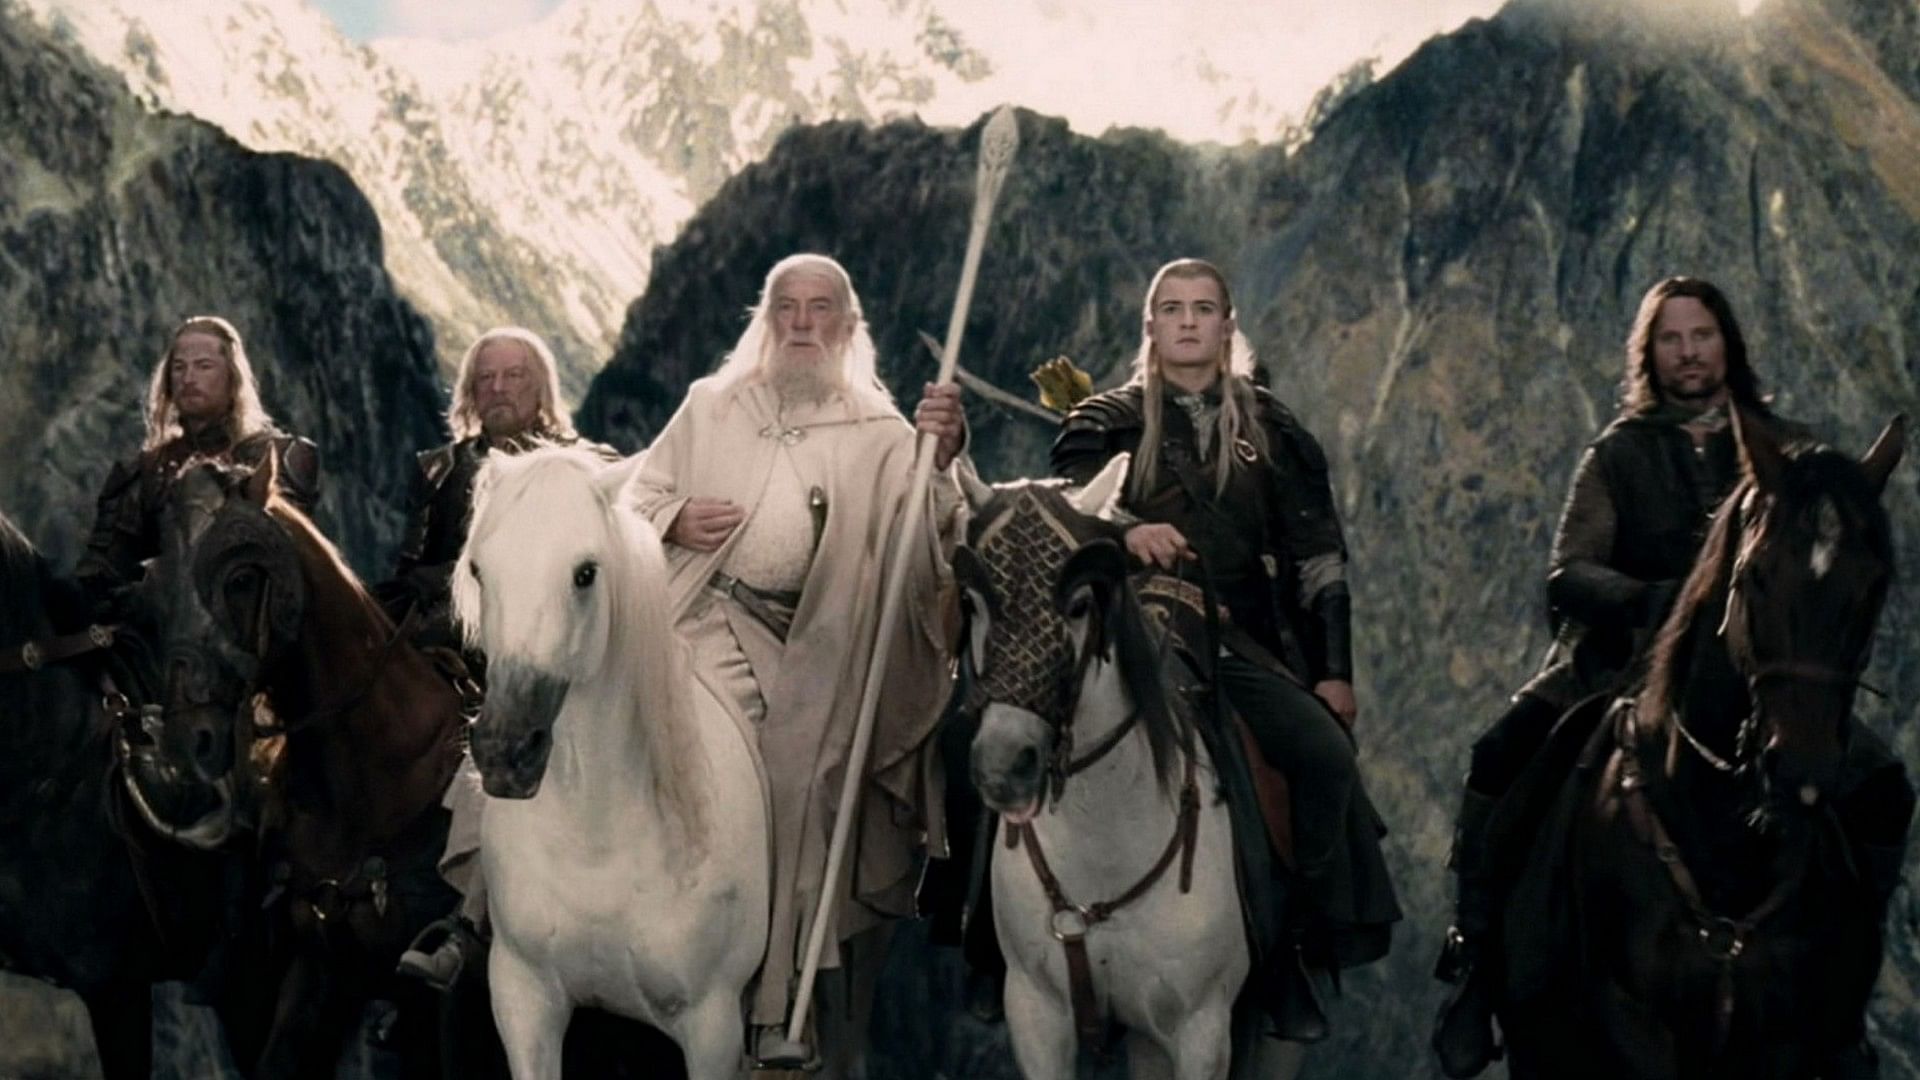 Are you ready for a multiplayer online game based on Lord of the Rings?